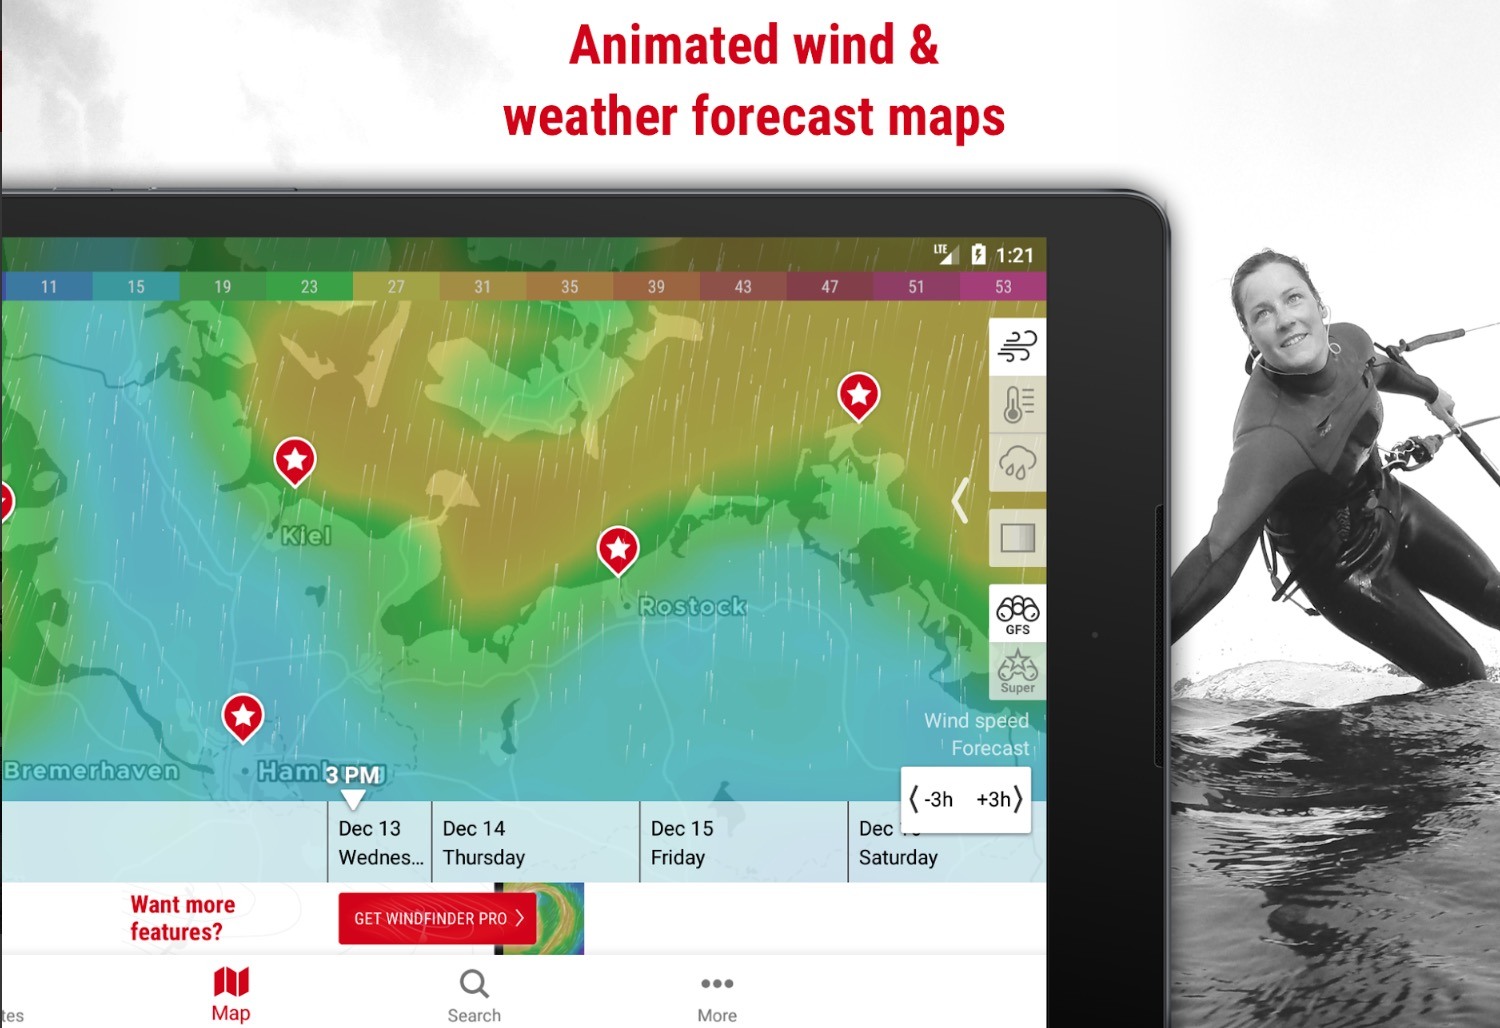 Windfinder "width =" 500 "height =" 343 "srcset =" https://tutomoviles.com/wp-content/uploads/2020/01/1580241631_669_7-application-Android-best-to-check-speed-angin- en schätze momento.jpg 1500w, https://androidappsforme.com/wp-content/ uploads / 2019/11 / Windfinder-300x206.jpg 300w, https://androidappsforme.com/wp-content/uploads/2019/11/Windfinder -1024x702.jpg 1024w, https://androidappsforme.com/wp-content/ uploads / 2019/11 / Windfinder-150x103.jpg 150w, https://androidappsforme.com/wp-content/uploads/2019/11/Windfinder -768x526.jpg 768w, https://androidappsforme.com/wp-content/ uploads / 2019/11 / Windfinder-80x55.jpg 80w, https://androidappsforme.com/wp-content/uploads/2019/11/Windfinder -220x151.jpg 220w, https://androidappsforme.com/wp-content/ uploads / 2019/11 / Windfinder-146x100.jpg 146w, https://androidappsforme.com/wp-content/uploads/2019/11/Windfinder -219x150.jpg 219w, https://androidappsforme.com/wp-content/ uploads / 2019/11 / Windfinder-347x238.jpg 347w, https: // andro idappsforme.com/wp-content/uploads/2019/11/Windfinder-606x415.jpg 606w, https://androidappsforme.com / wp-content / uploads / 2019/11/Windfinder-711x487.jpg 711w, https: // androidappsforme.com/wp-content/uploads/2019/11/Windfinder-868x595.jpg 868w "size =" (maximale Breite): 500px) 100vw, 500px